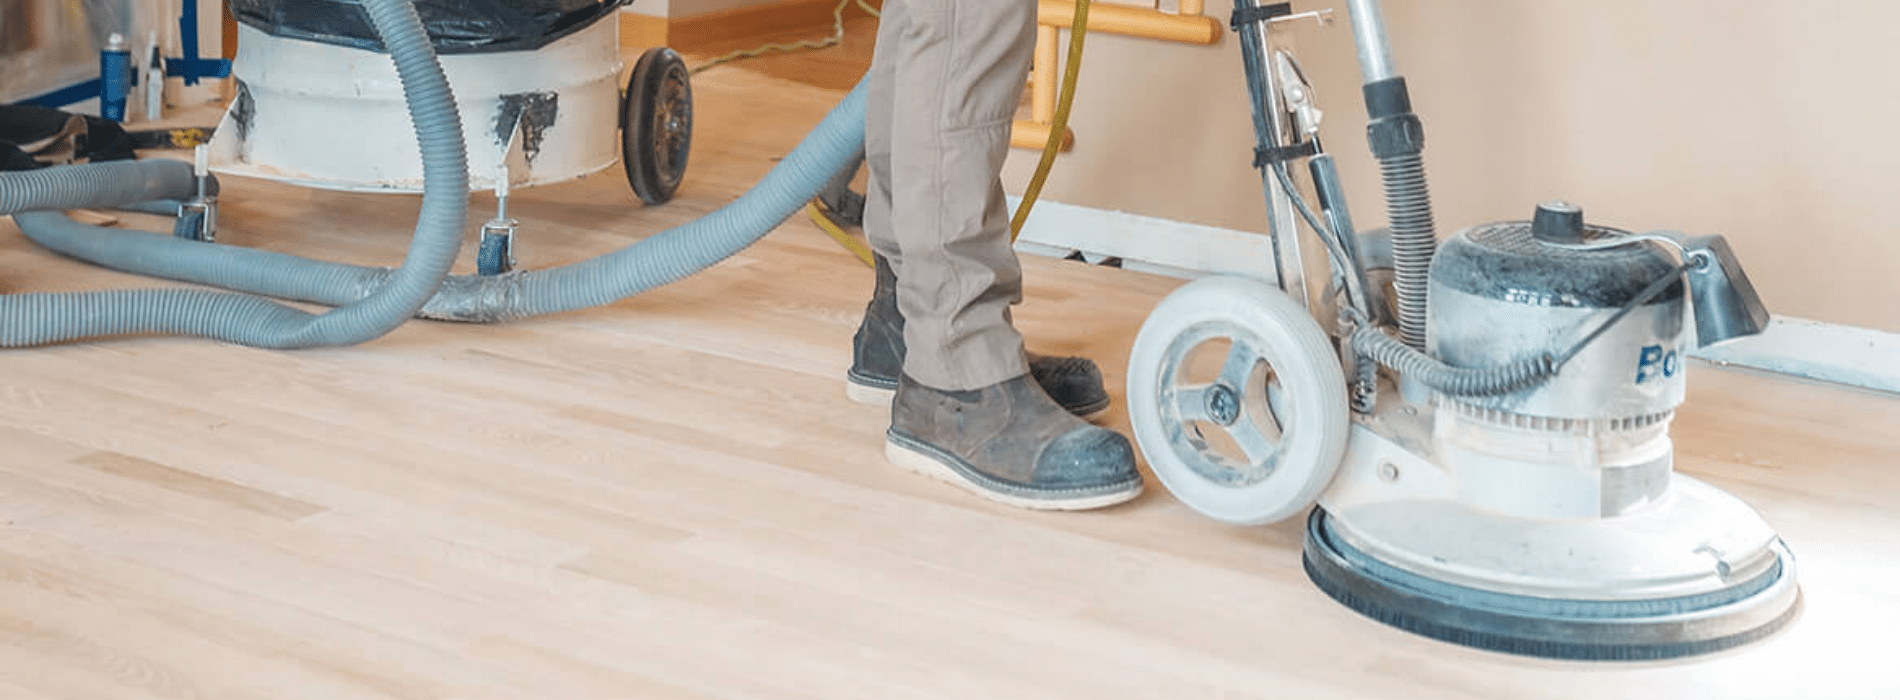 In Crofton Park, SE4, Mr Sander® are using the Bona FlexiSand 1.9, a powerful buffer sander with Ø 407 mm dimensions, 1.9 kW effect, and 230V voltage. It operates at 50 Hz/60 Hz frequency and is connected to a dust extraction system with a HEPA filter for optimal cleanliness and efficiency.